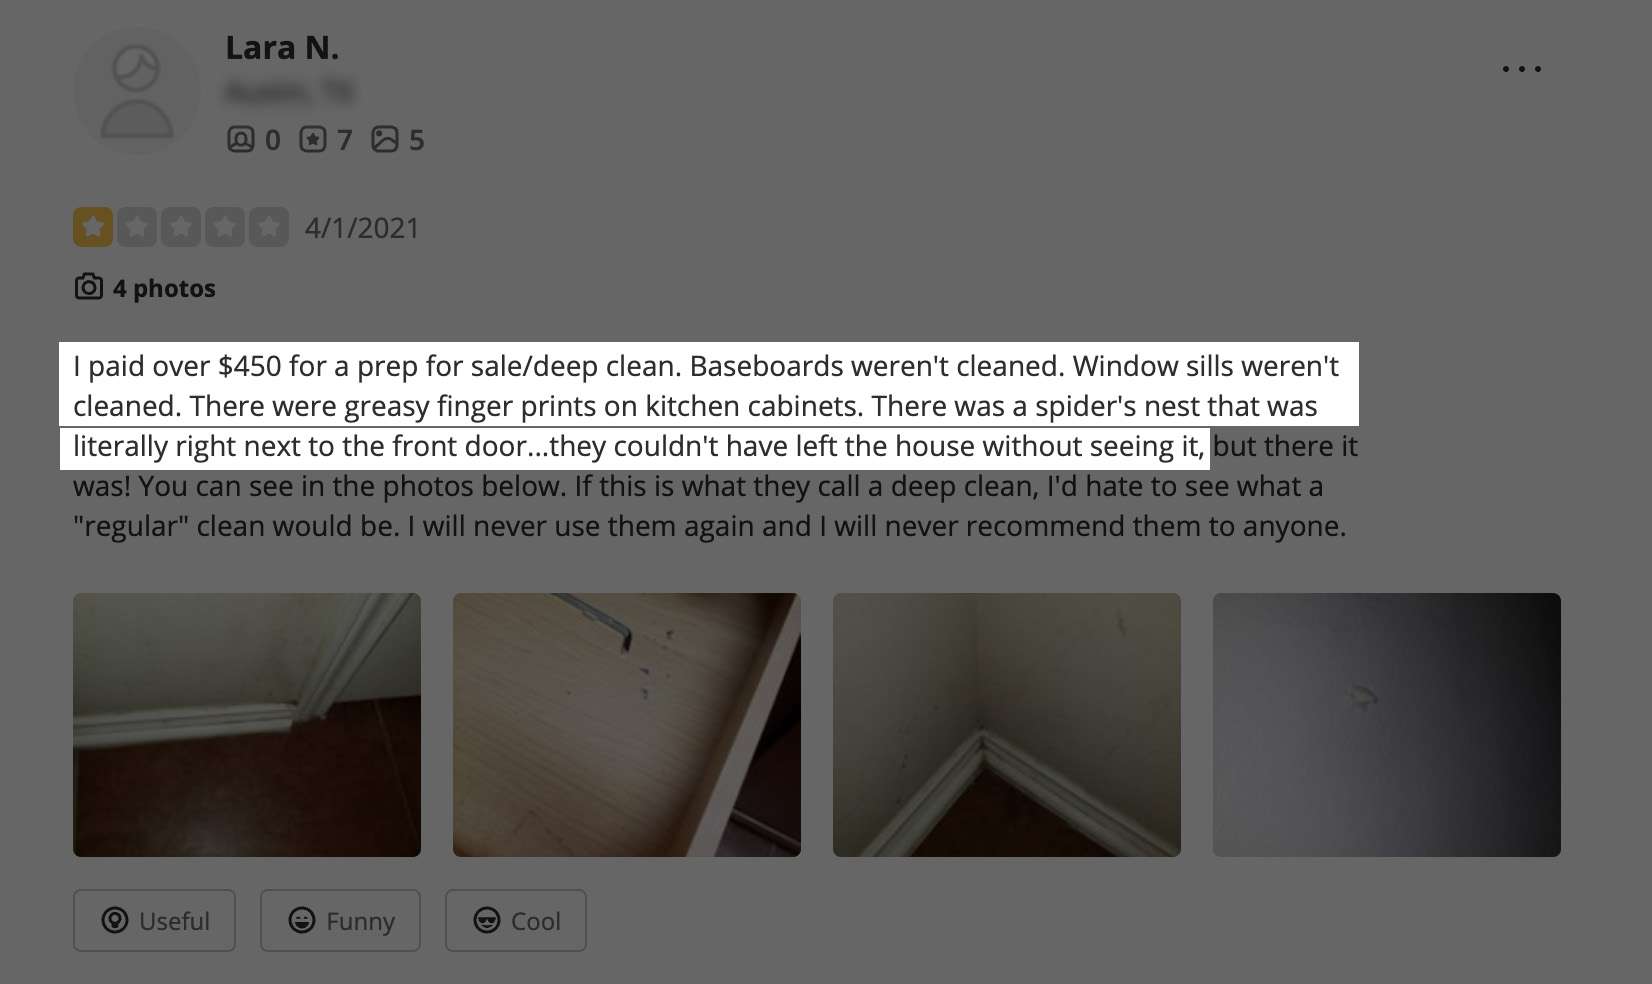 A screenshot of a 1-star review of a house cleaning service from Yelp, with a few key lines highlighted.The customer in question was upset because many obvious things were missed during the cleaning. 